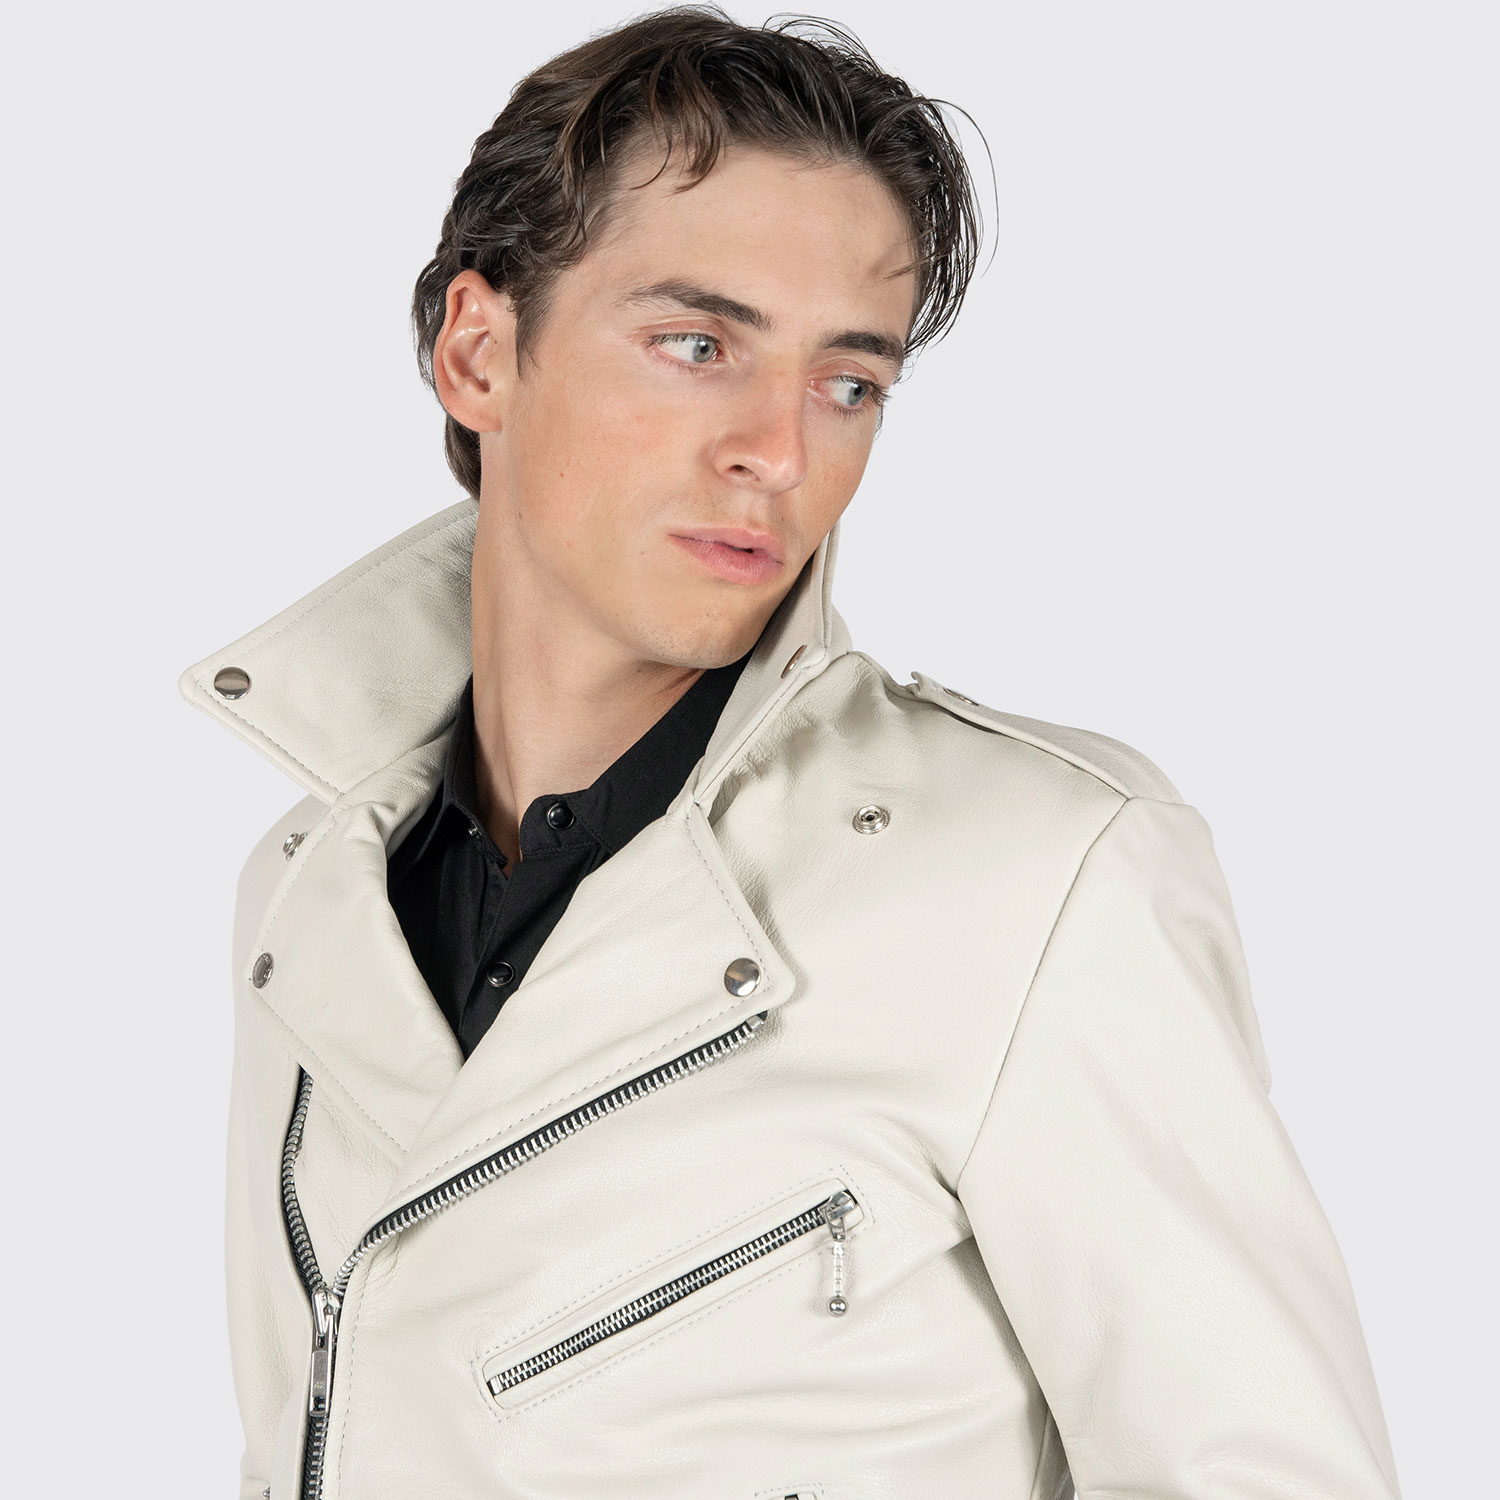 Commando - White Leather Jacket - Men's by Straight to Hell